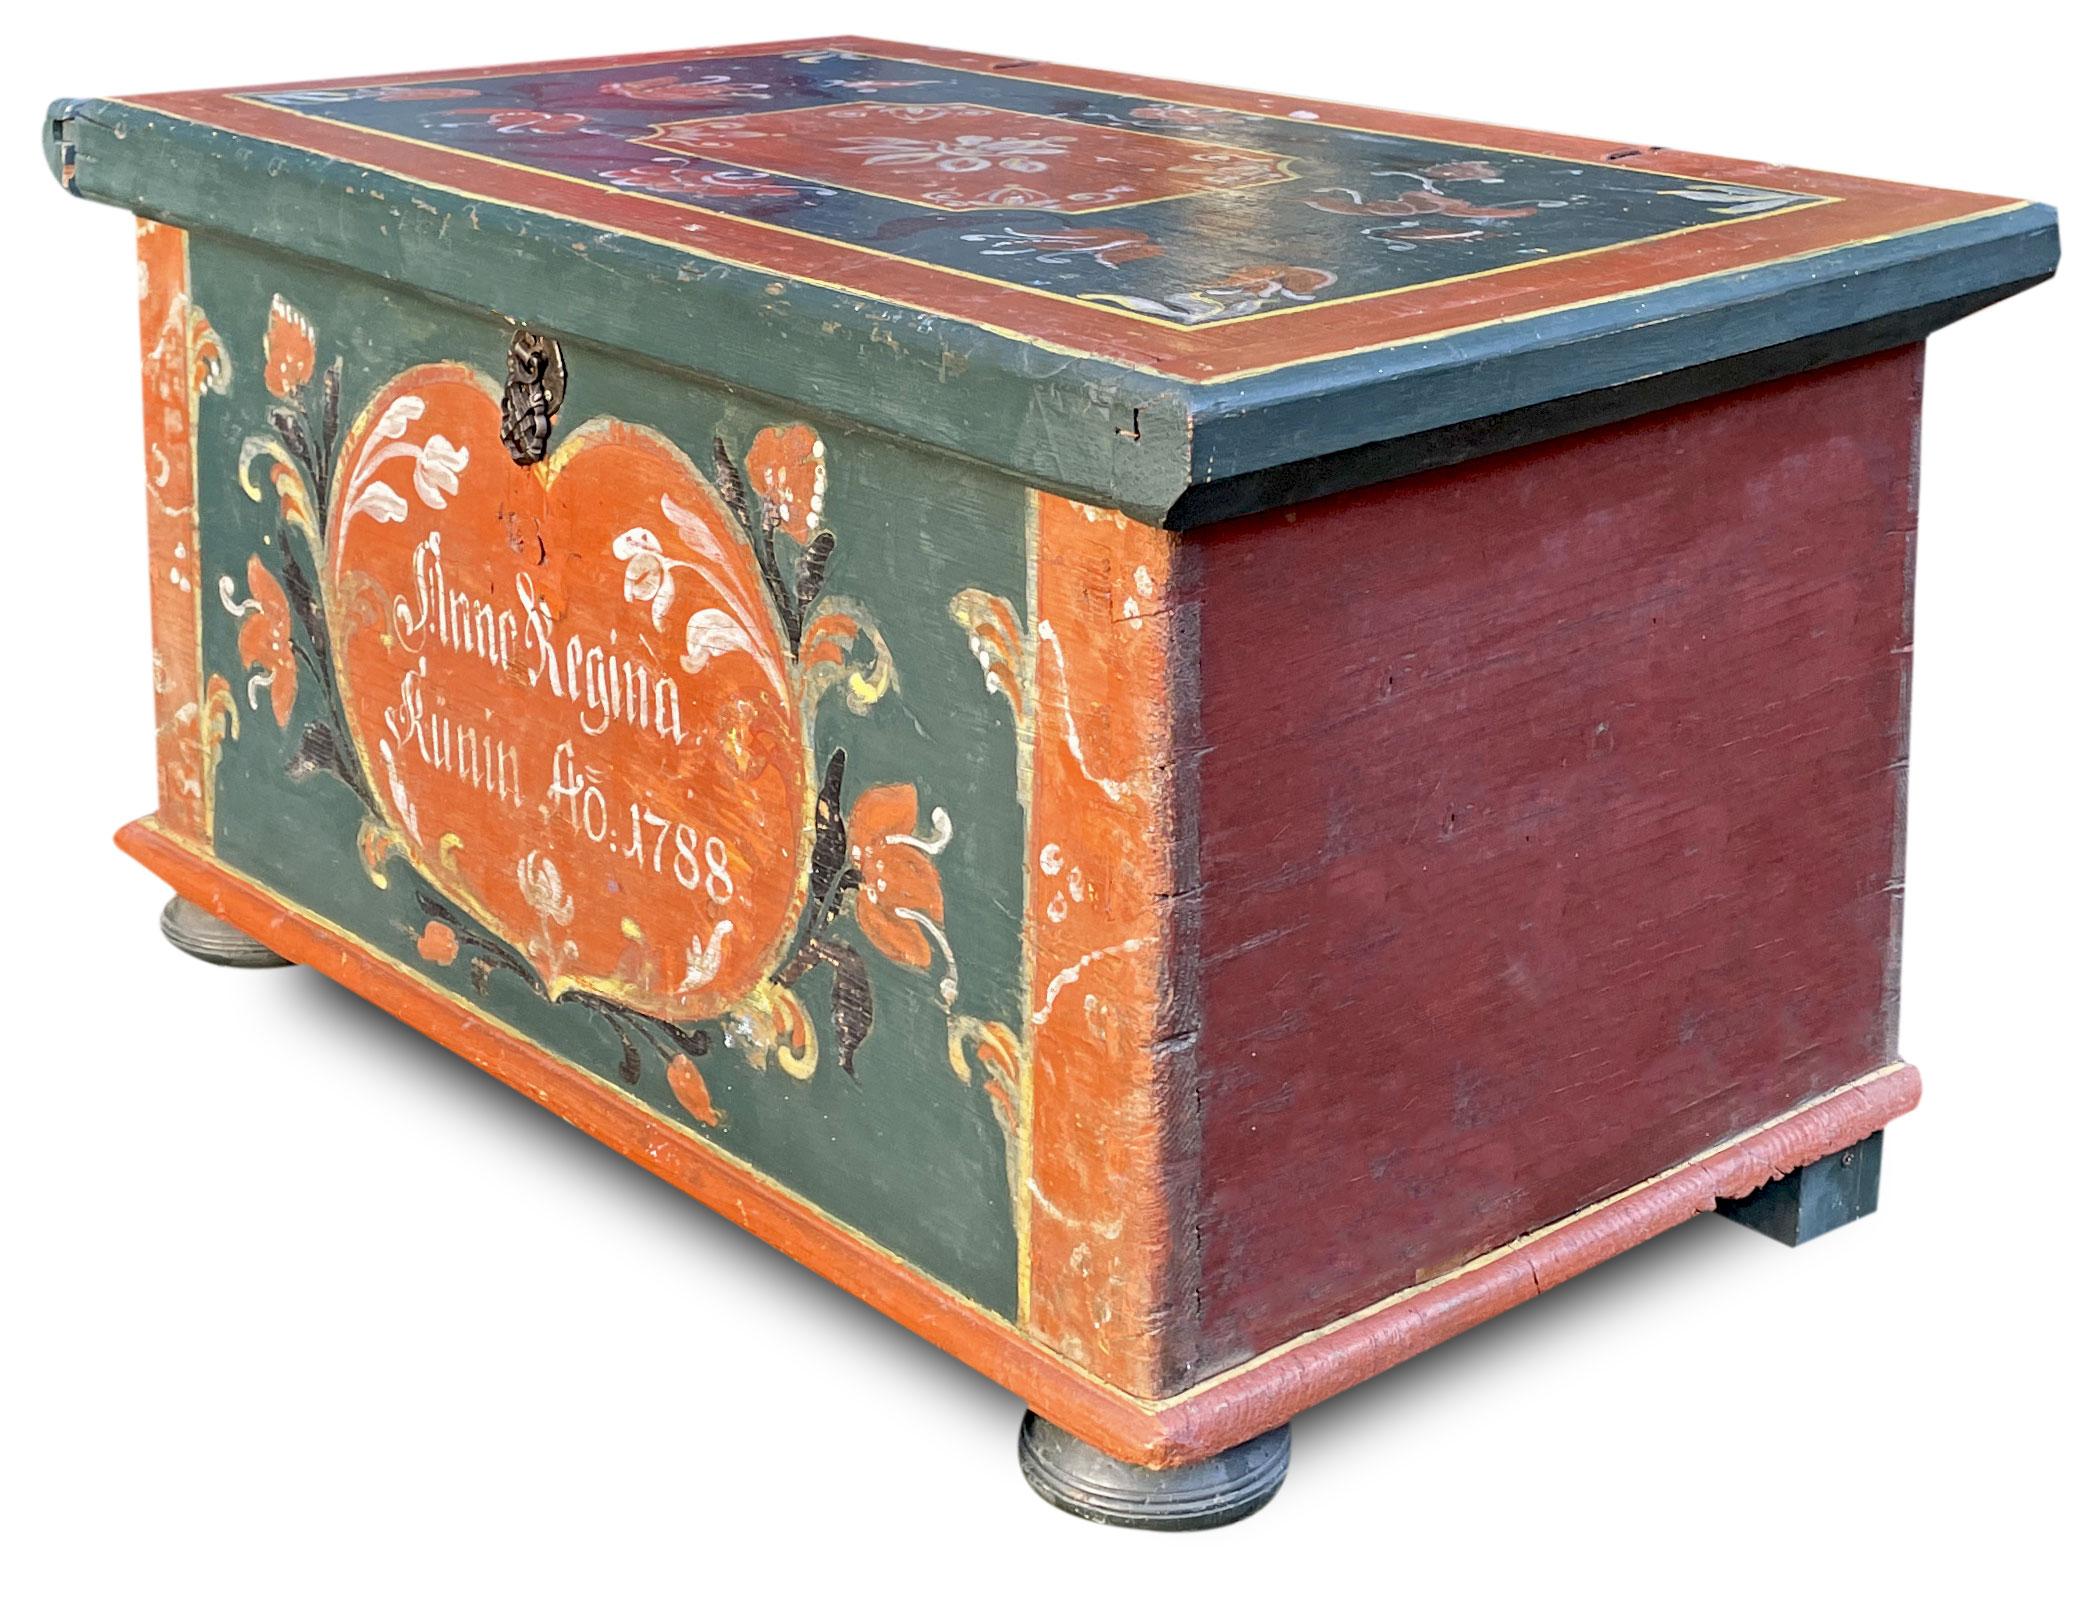 Small antique painted chest - Tyrol (Alps)

Measures: H.43 - L.80 - P.48

Small antique decorated chest, partially restored. Entirely painted in petroleum blue, it has large spaces over the entire surface decorated with floral motifs on a red